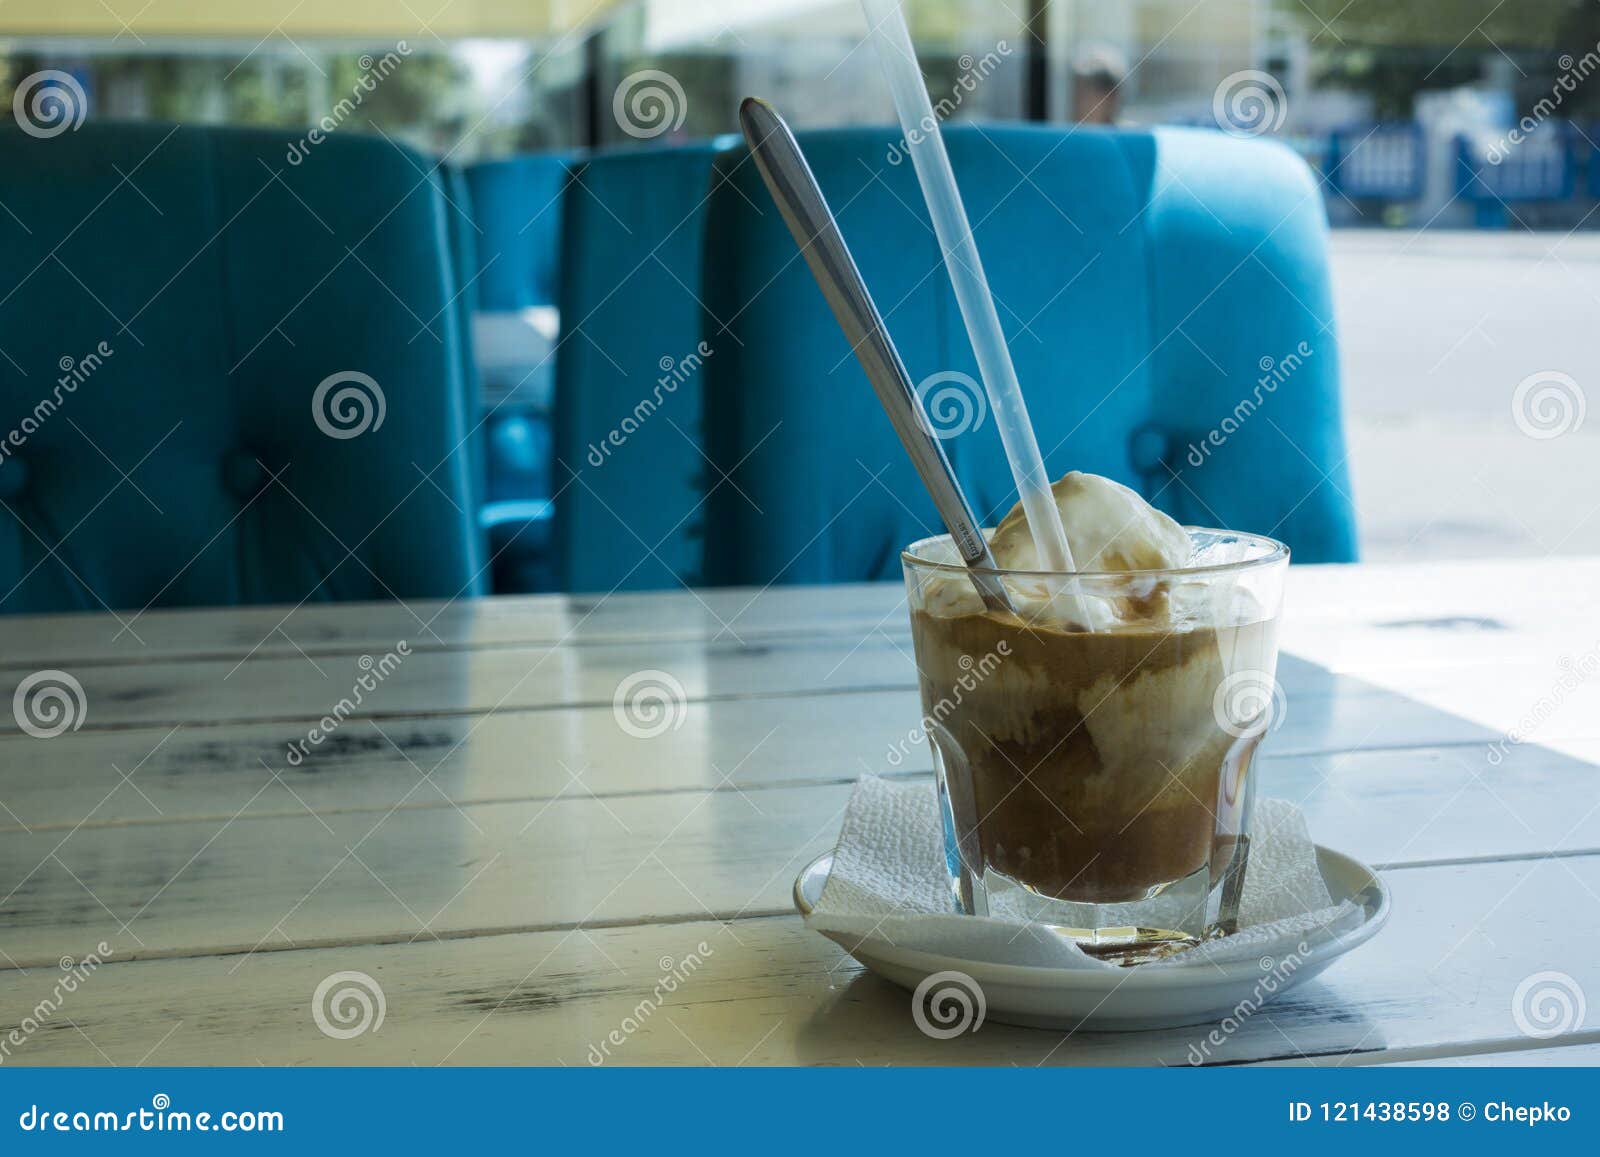 caramel frappe coffee in the cafe